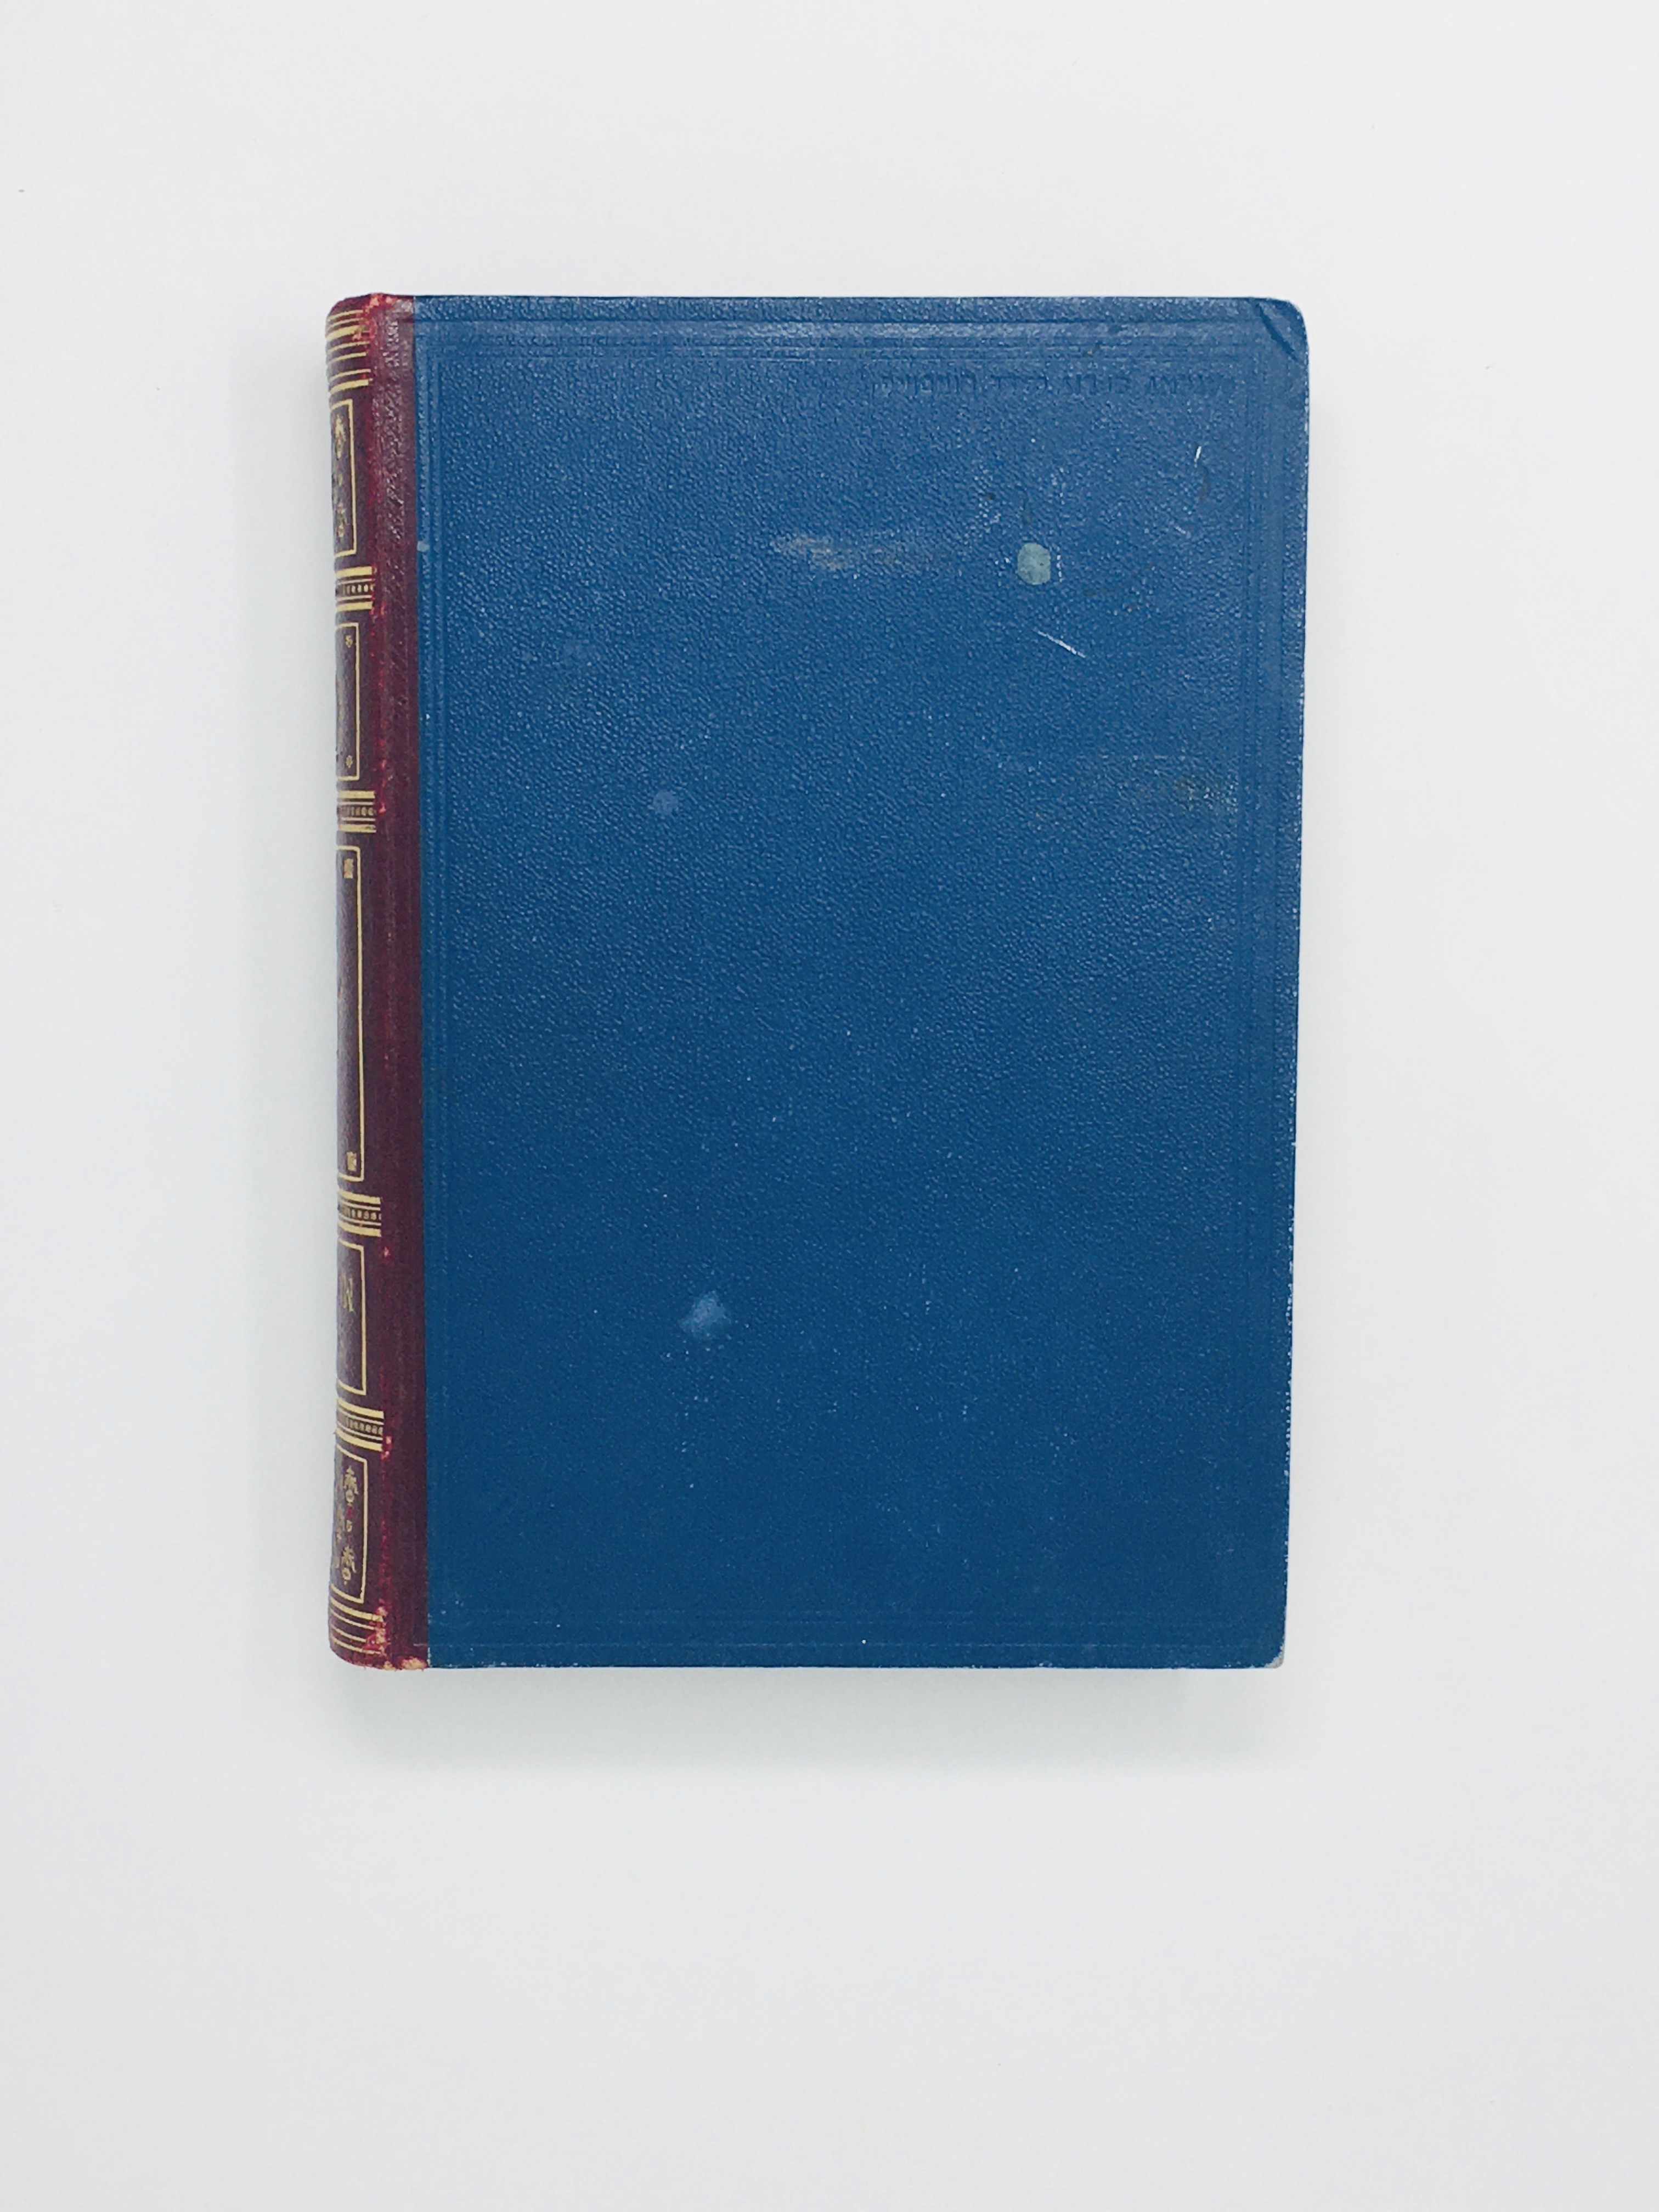 Dreyfus Affair - Book Collection featuring The Ben Shahn Prints (Limited First Edition) - Image 71 of 73